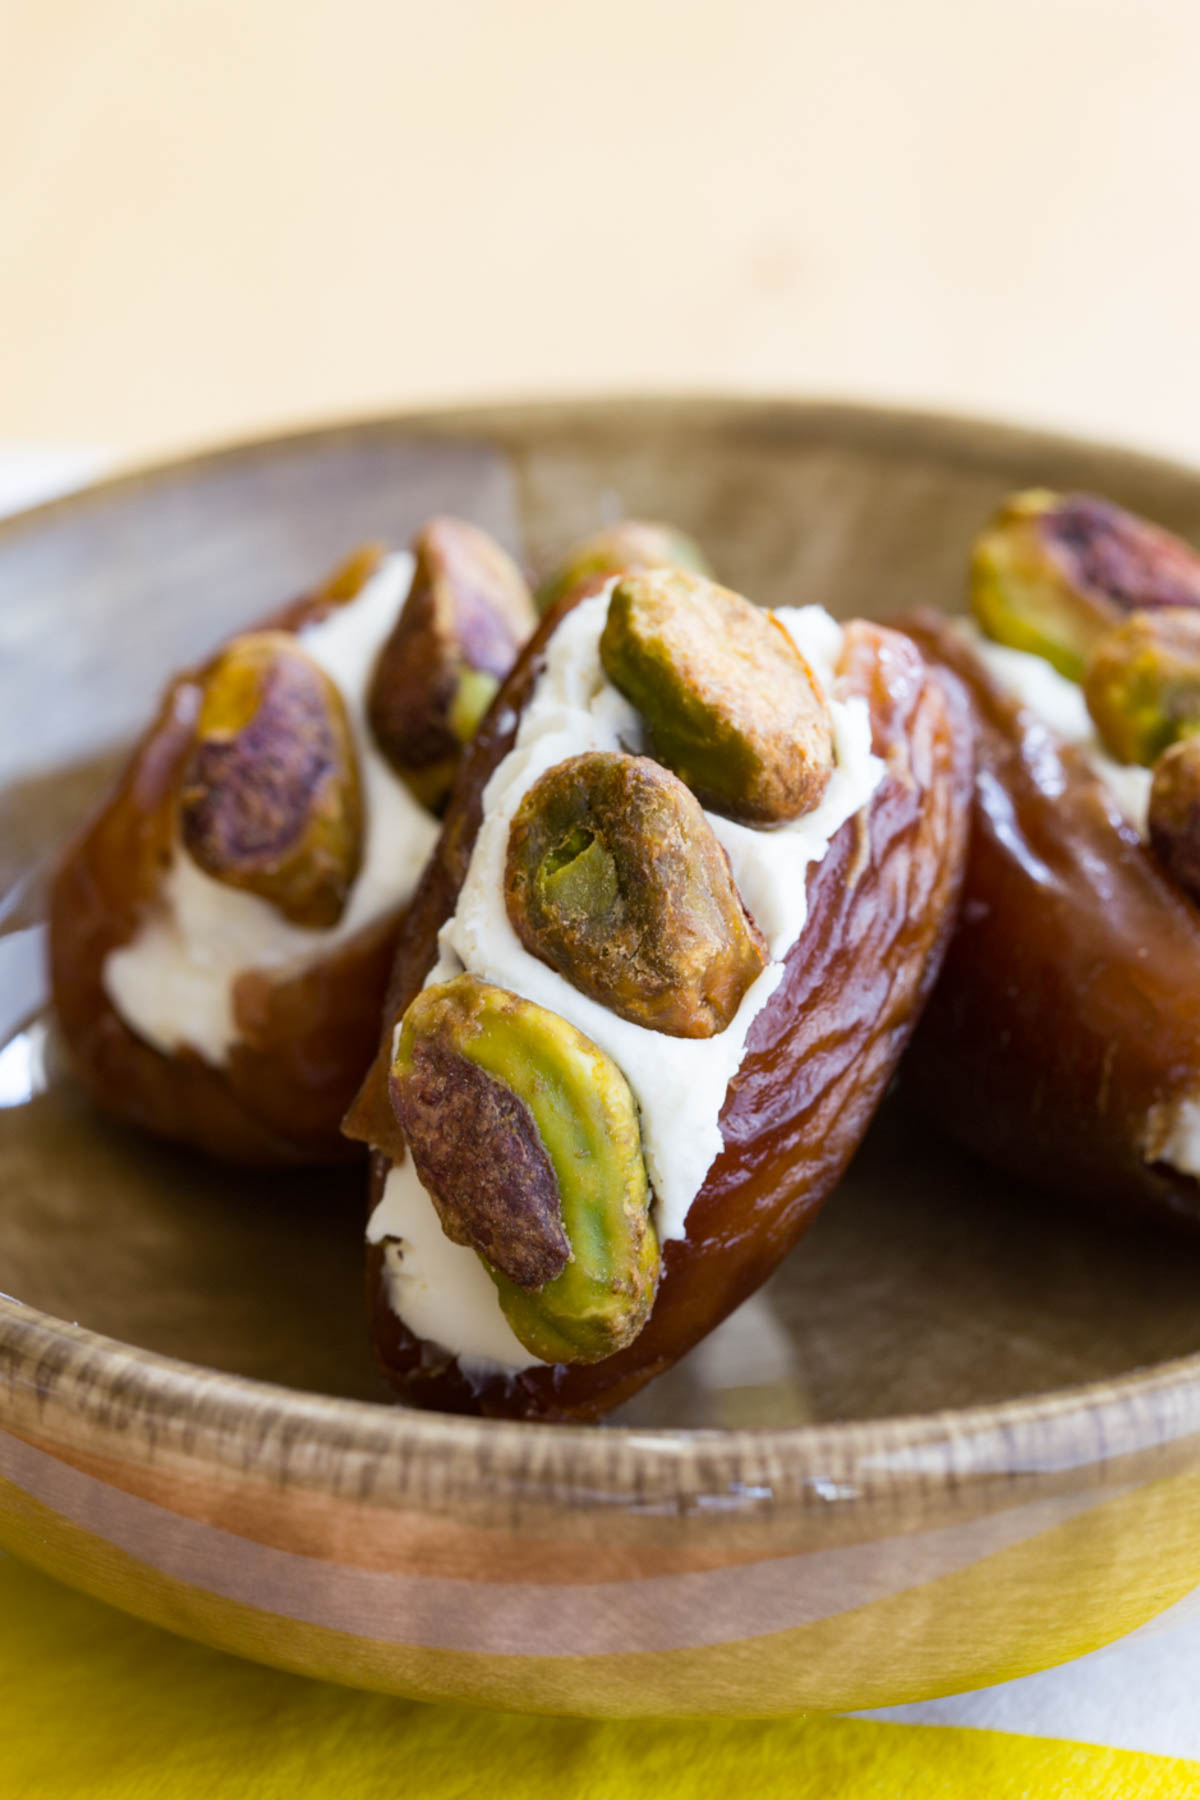 Three dates stuffed with cream cheese and three pistachios.